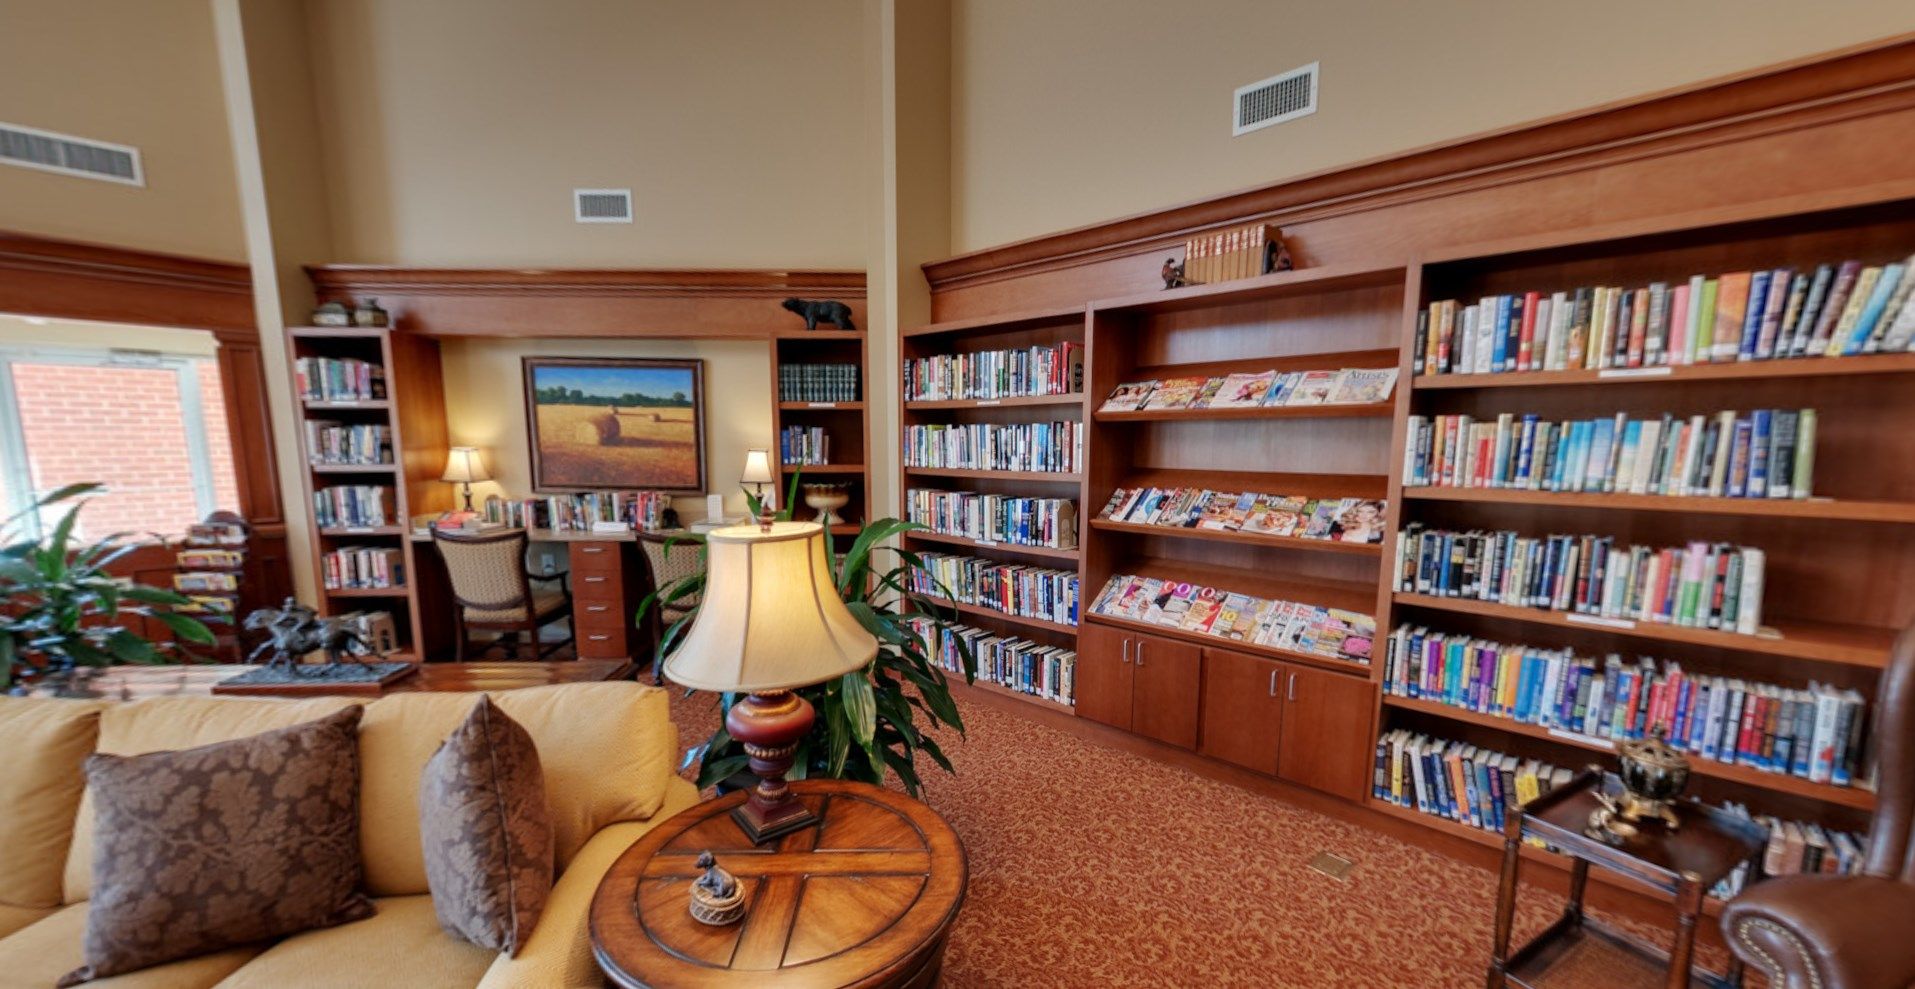 Interior view of Abernethy Laurels senior living community featuring a cozy library room with stylish decor.